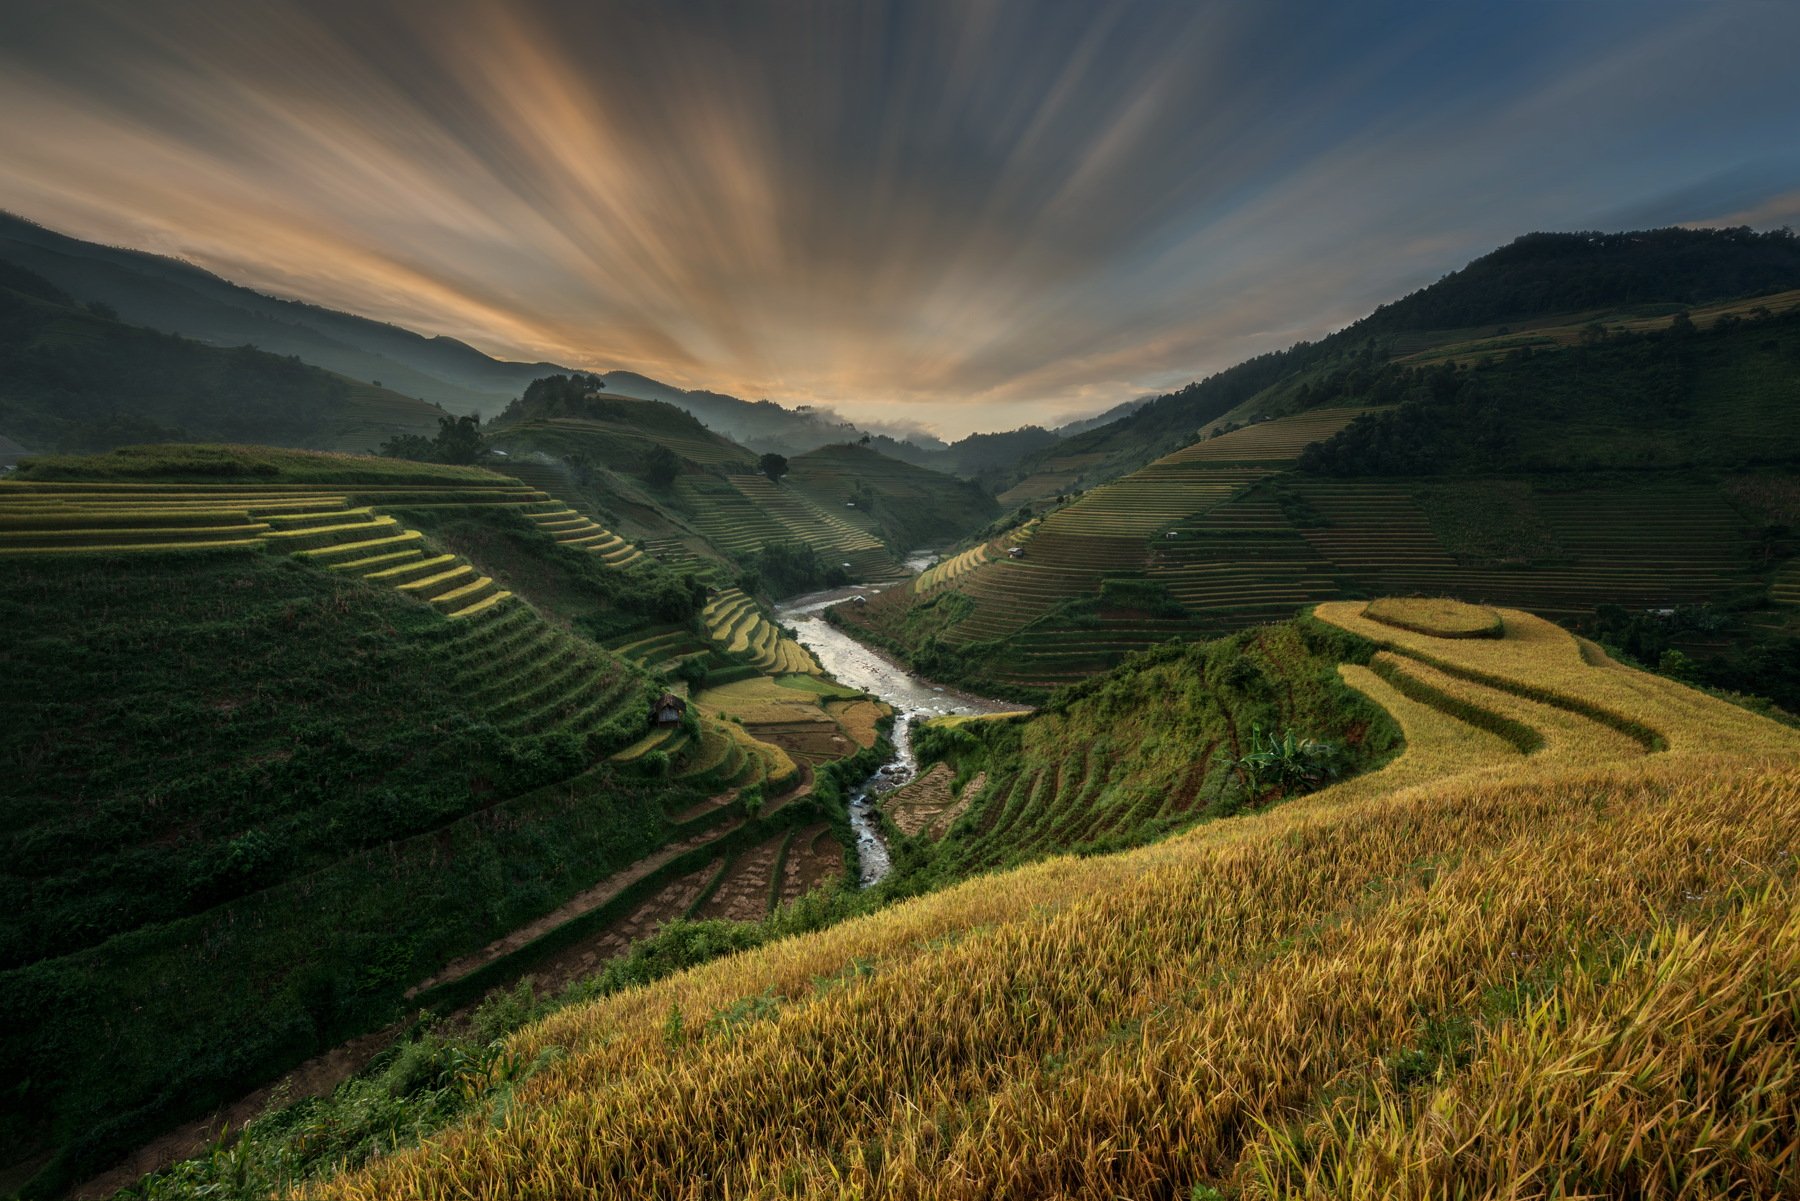 Beauty In Nature, Color Image, Crop, Field ,Gold, Colored ,Horizontal, Landscape, Mountain ,Mountain Range, No People, North Vietnam, Outdoors, Photography, Rice Paddy, Rural, Scen,e Terraced, Field, Tranquil Scene, Travel Destinations, Tree, Vietnam, Vie, sarawut intarob